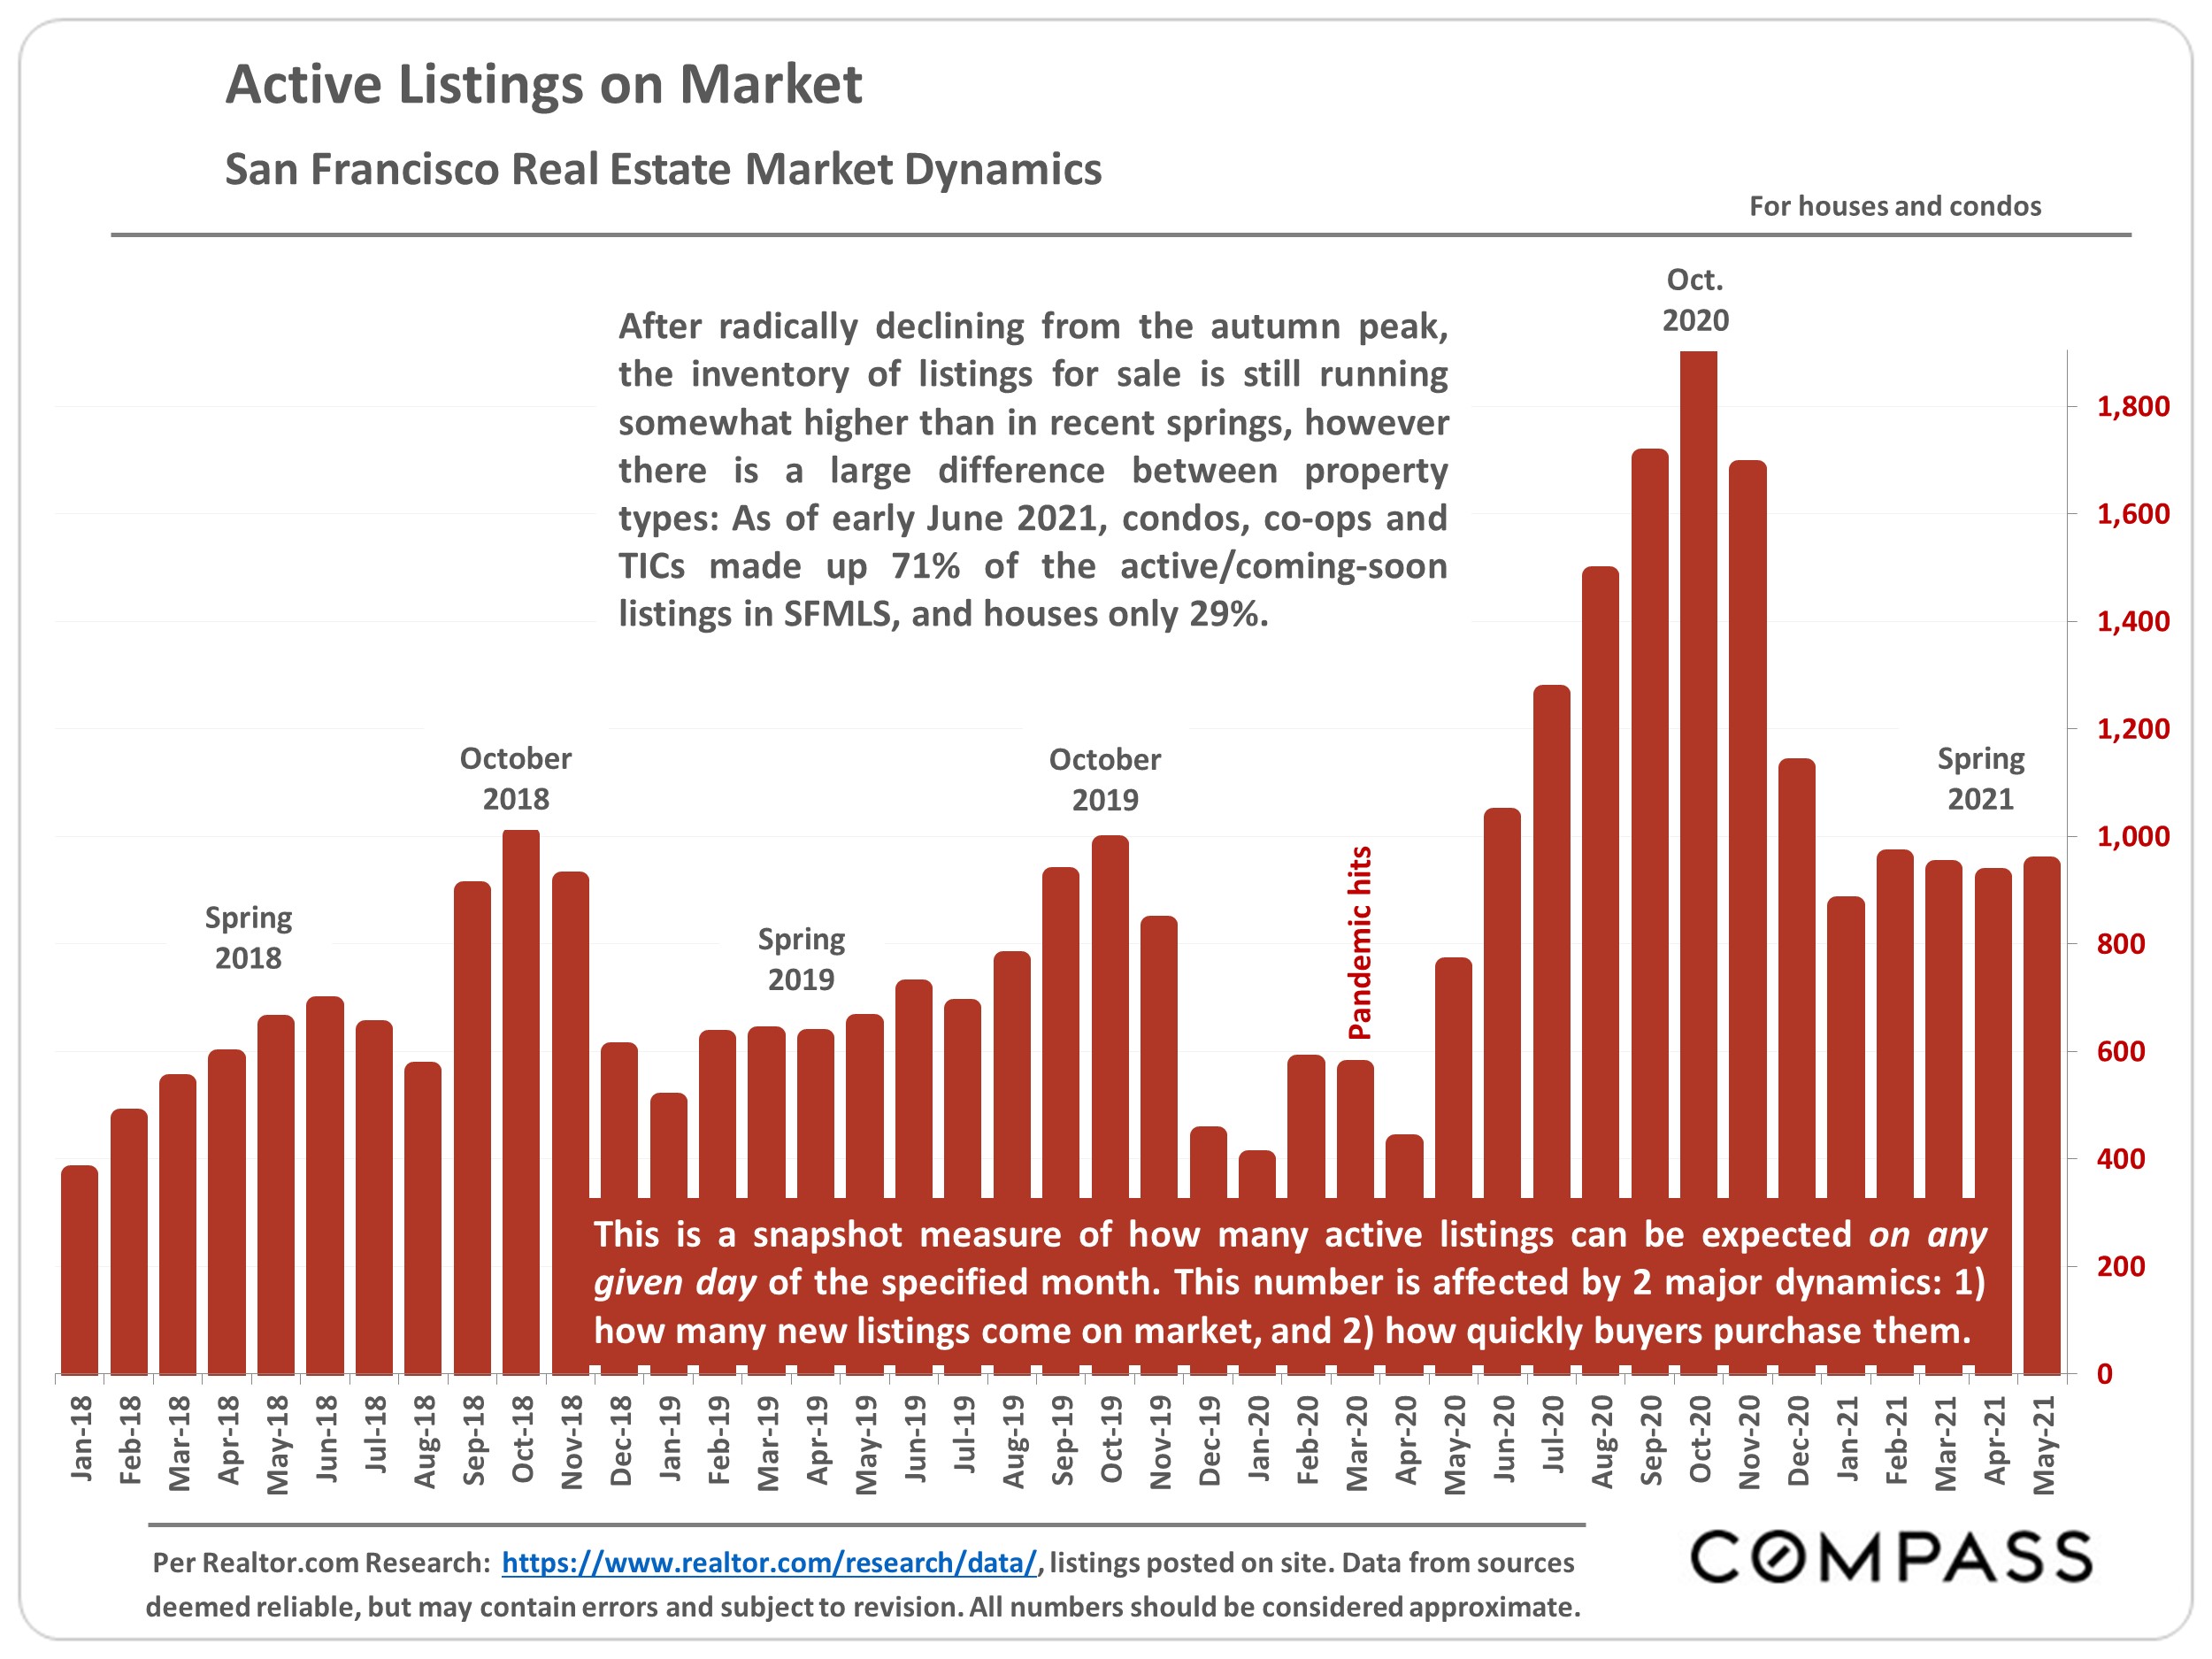 Chart showing theActive Listings on Market, San Francisco Real Estate Market Dynamics for houses and condos